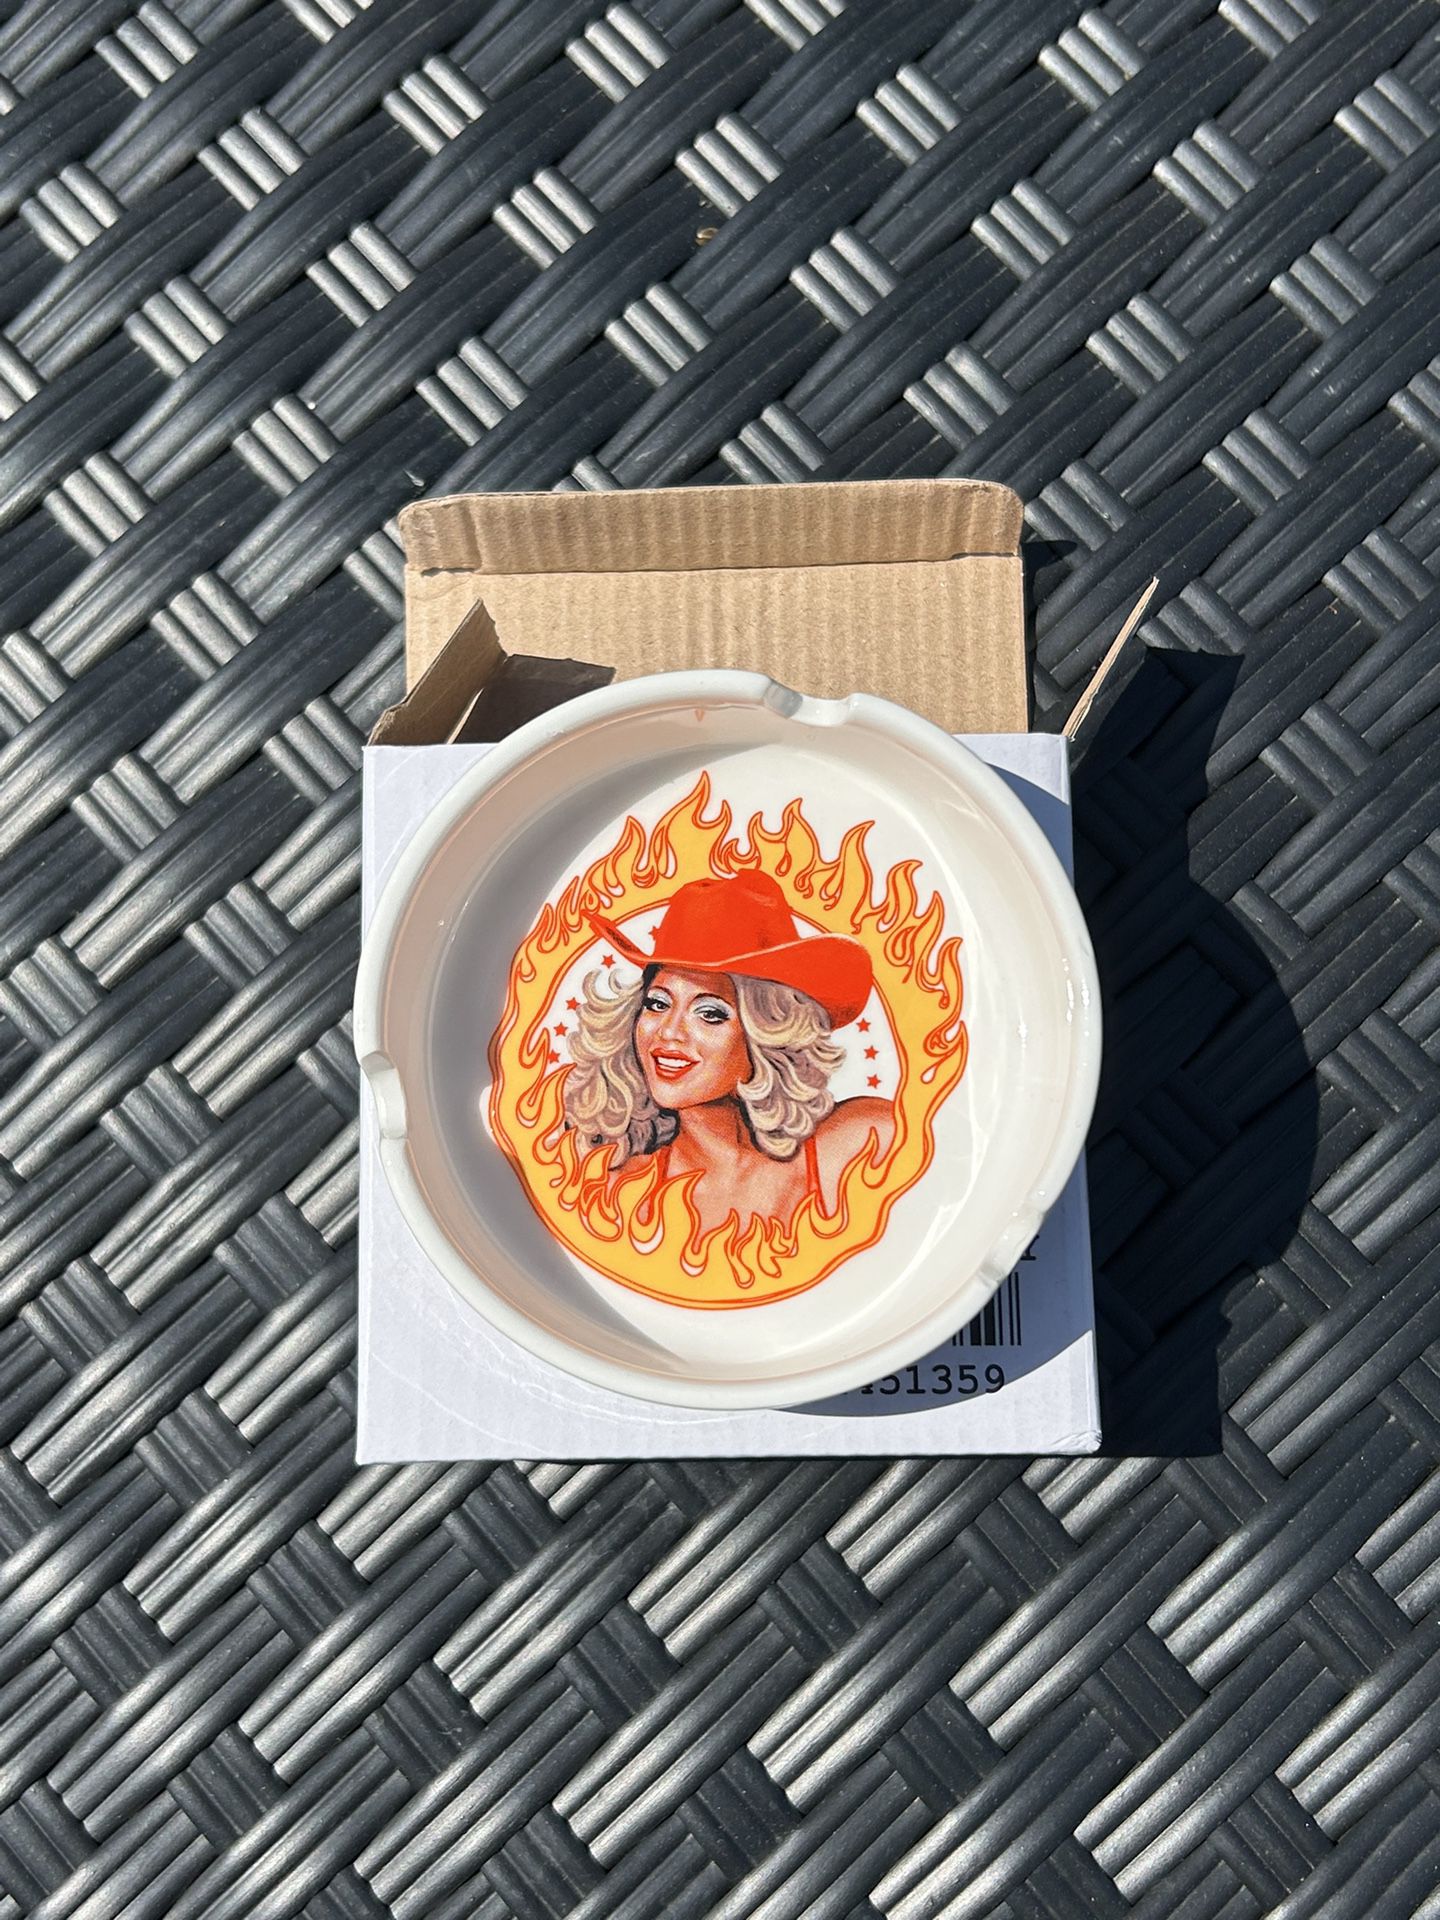 Act ii - Cowboy Carter - Beyoncé  - Hold’Em Ashtray 🔥 - IN HAND, Fast Shipping!